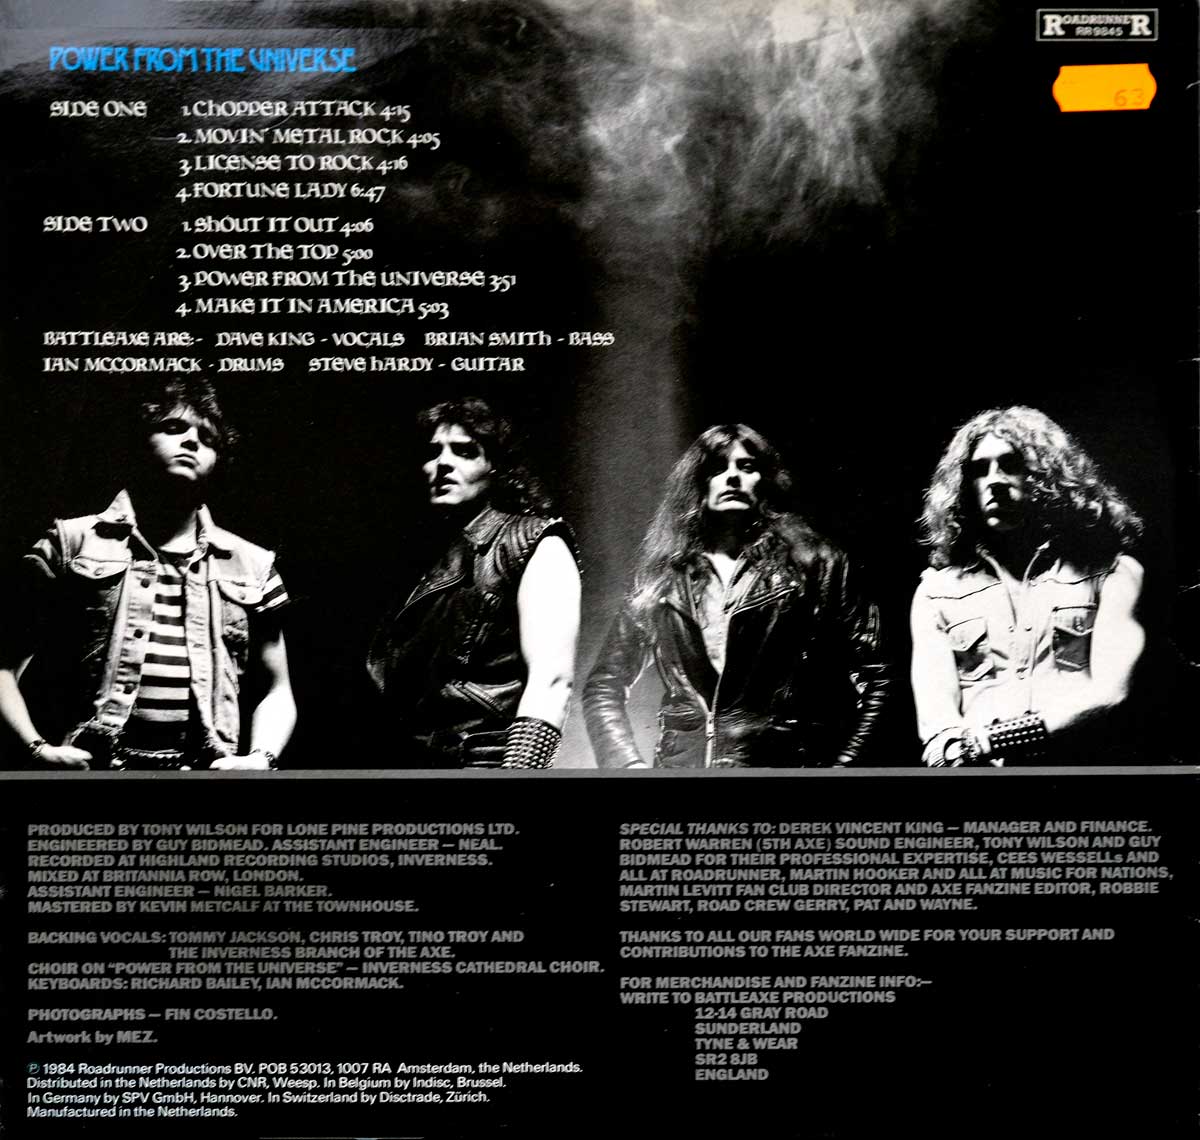 High Resolution Photo Album Back Cover of BATTLEAXE -  Power from The Universe https://vinyl-records.nl